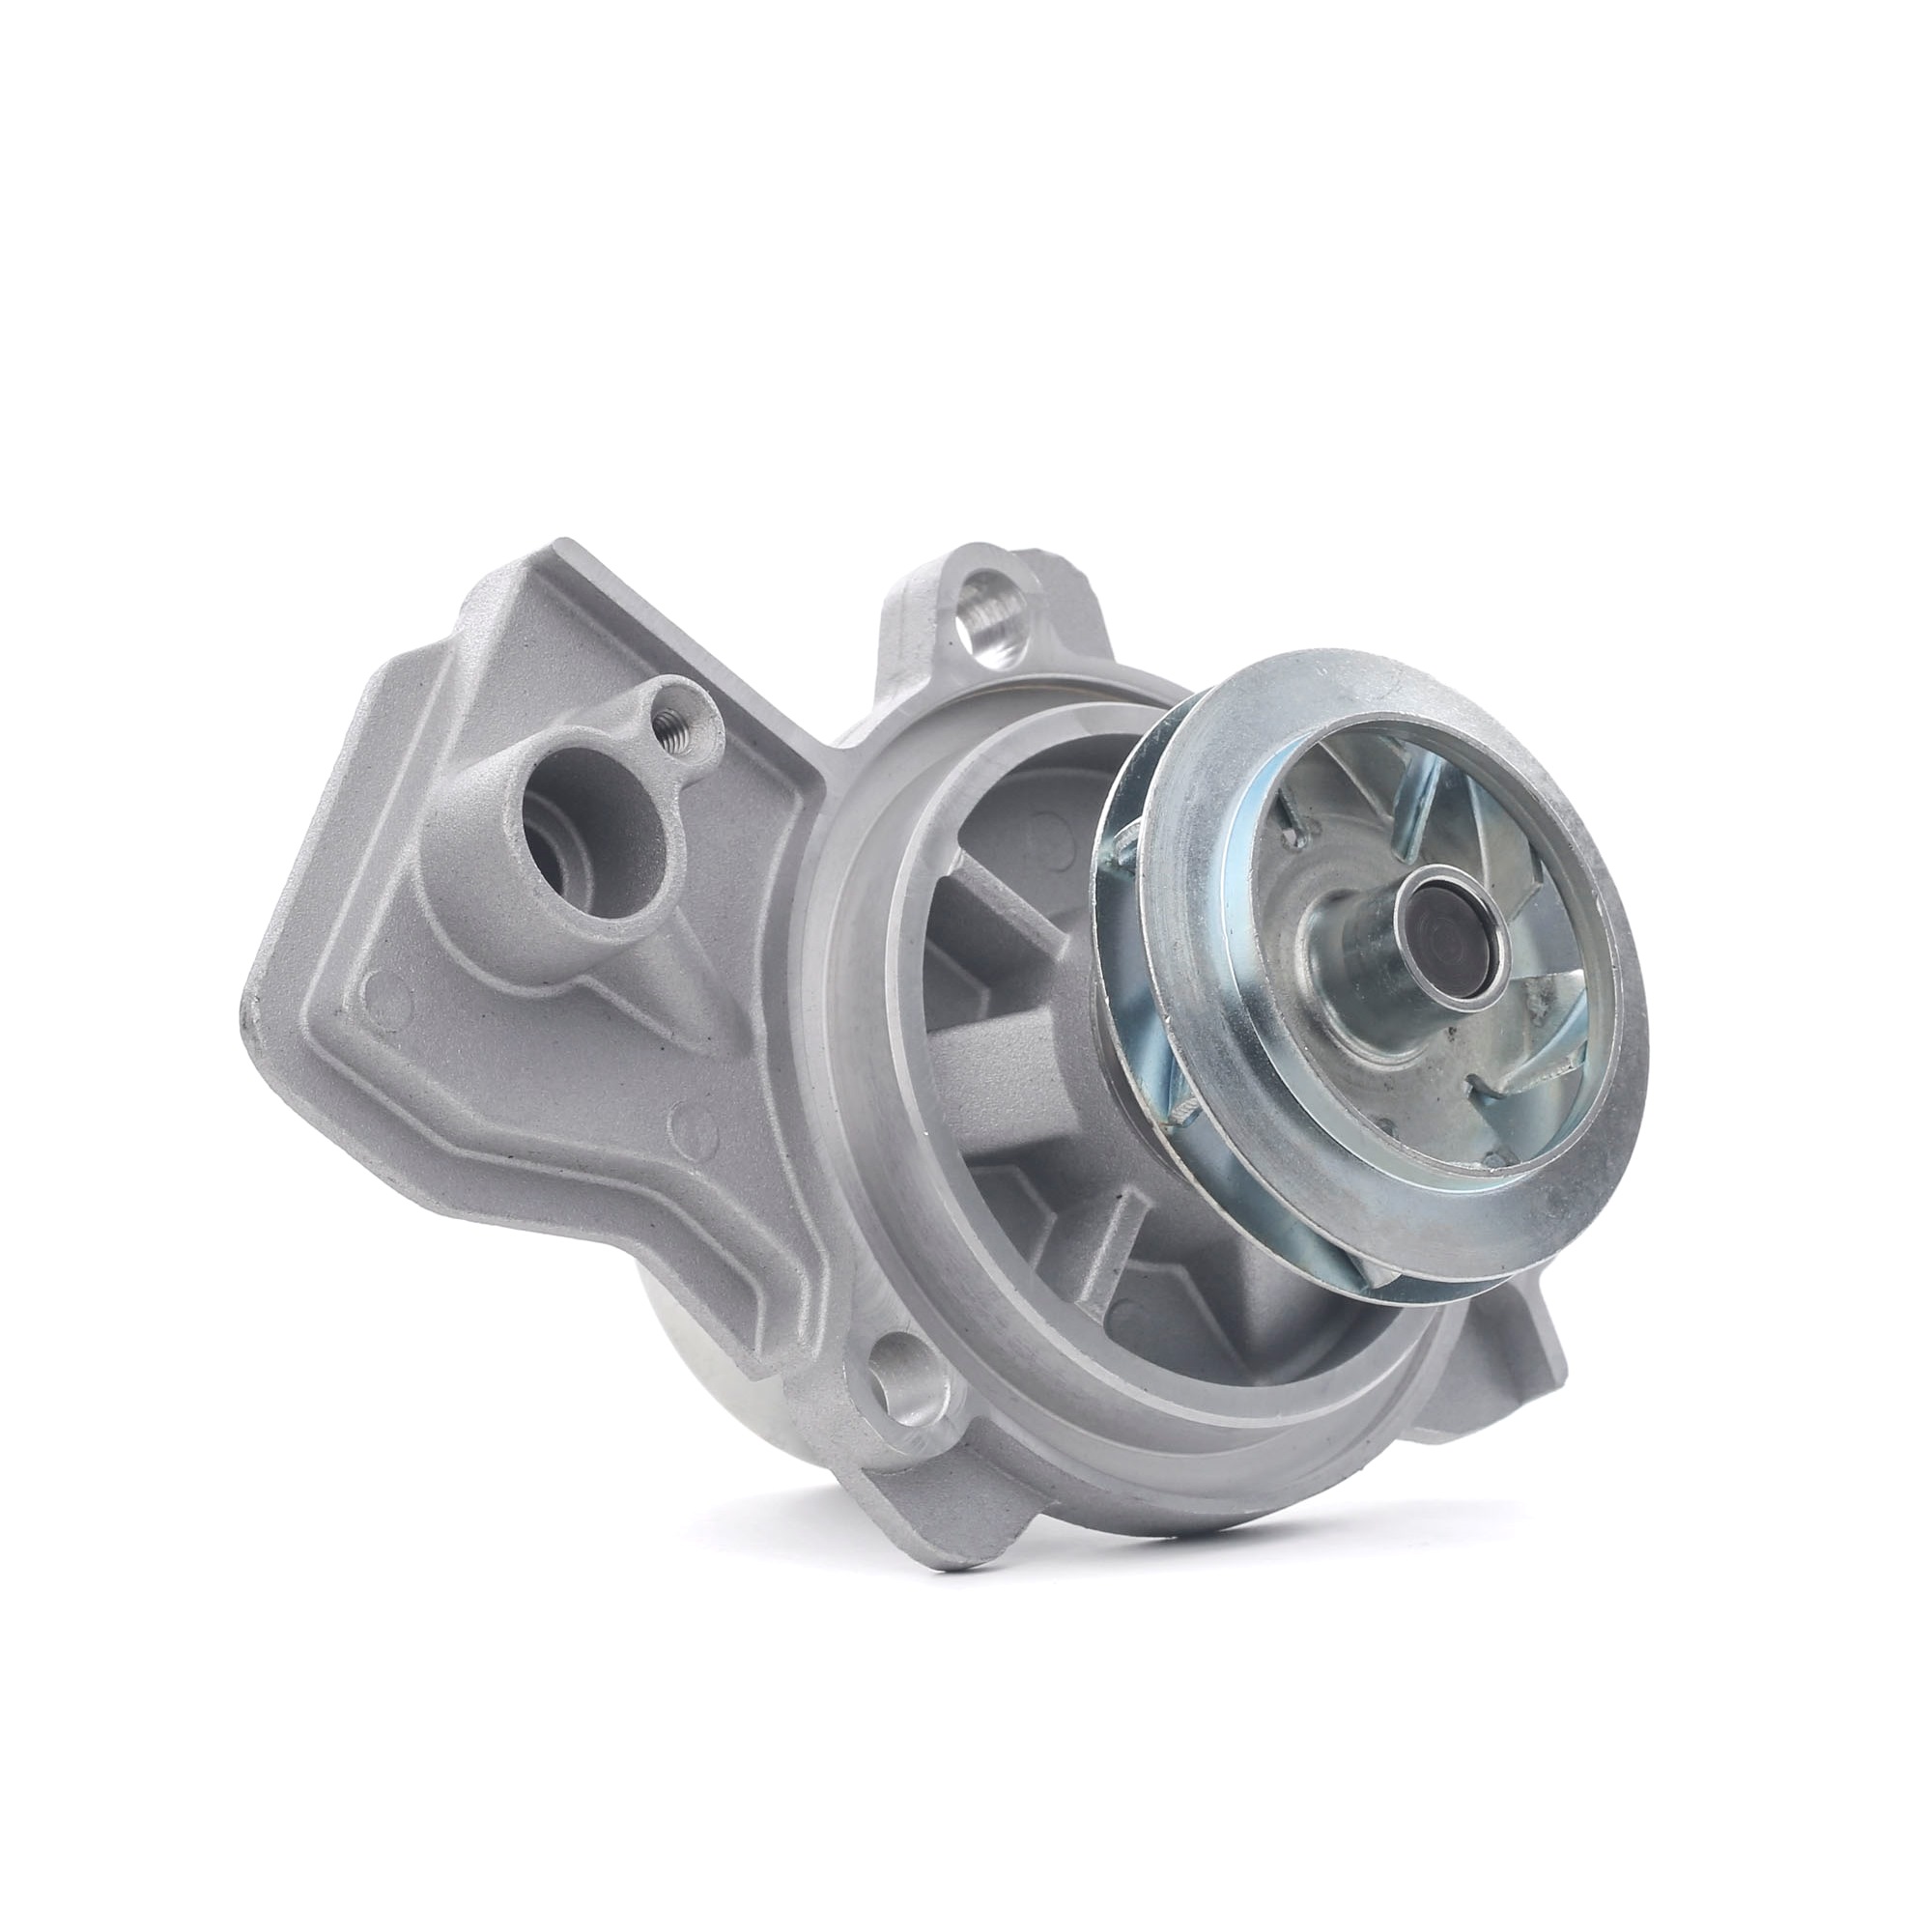 STARK SKWP-0520577 Water pump Grey Cast Iron, with seal ring, Mechanical, Metal, for timing belt drive